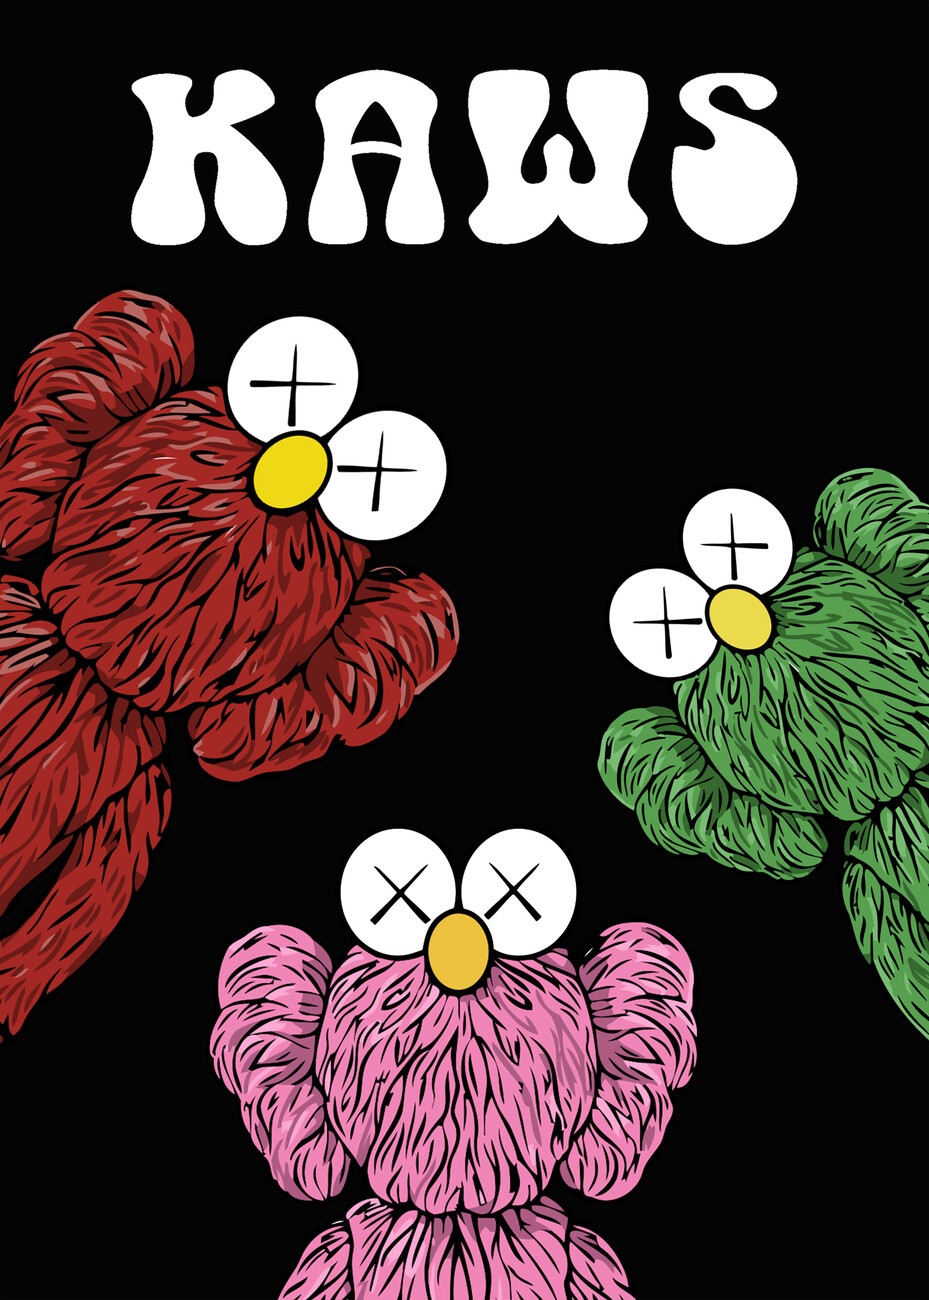 Kaws Stickers for Sale  Brand stickers, Easy canvas painting, Kaws  wallpaper